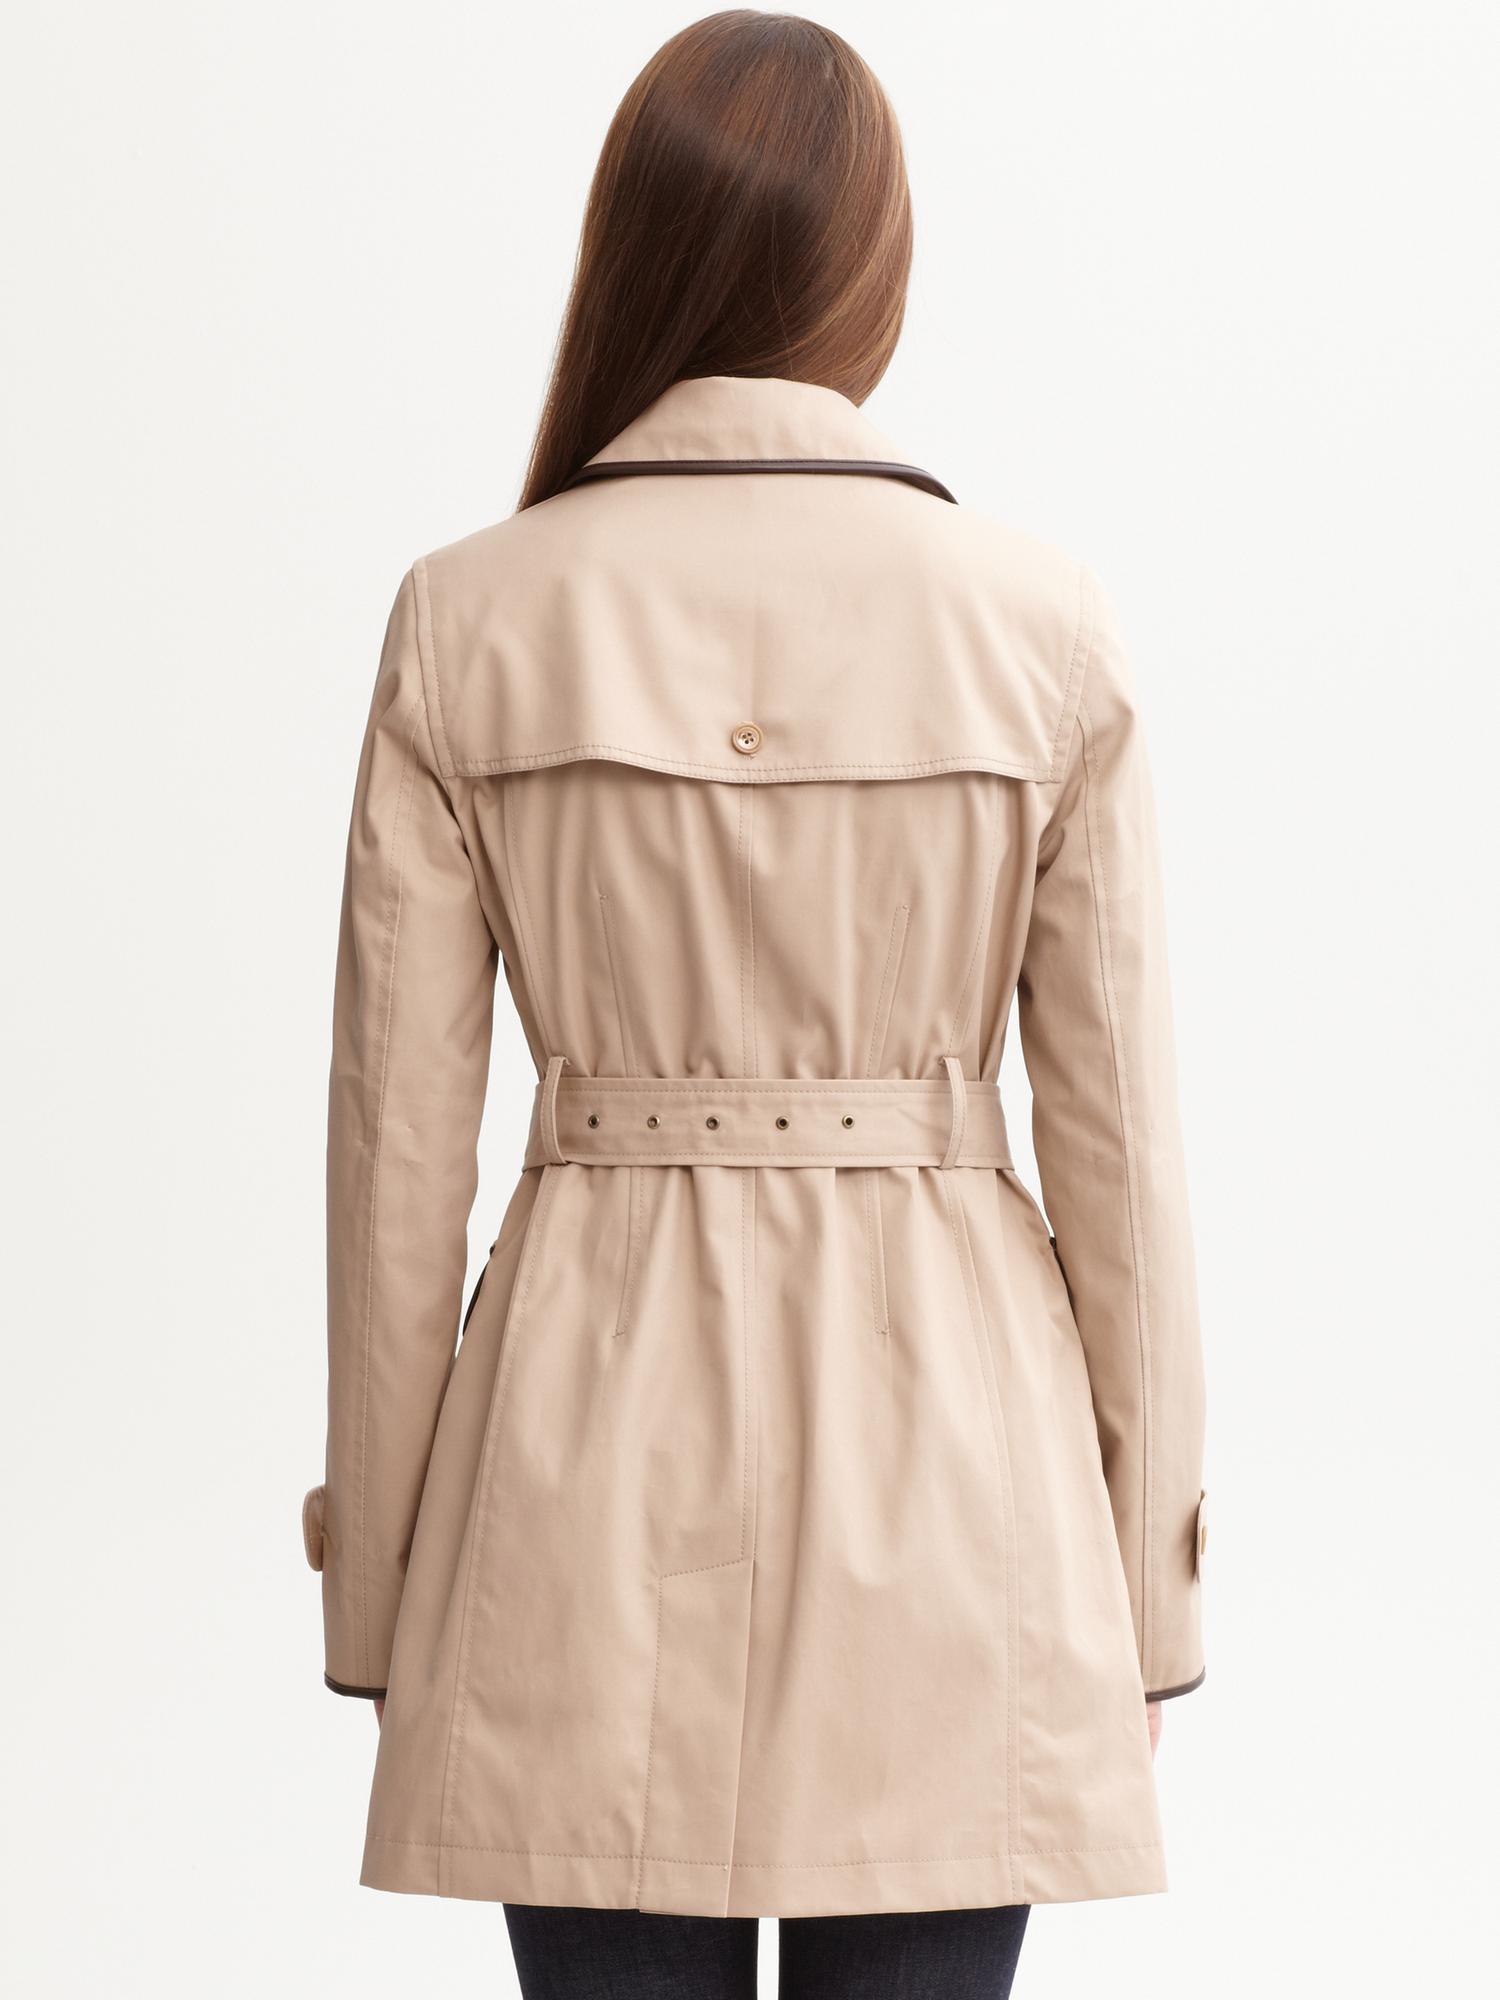 Equestrian trench